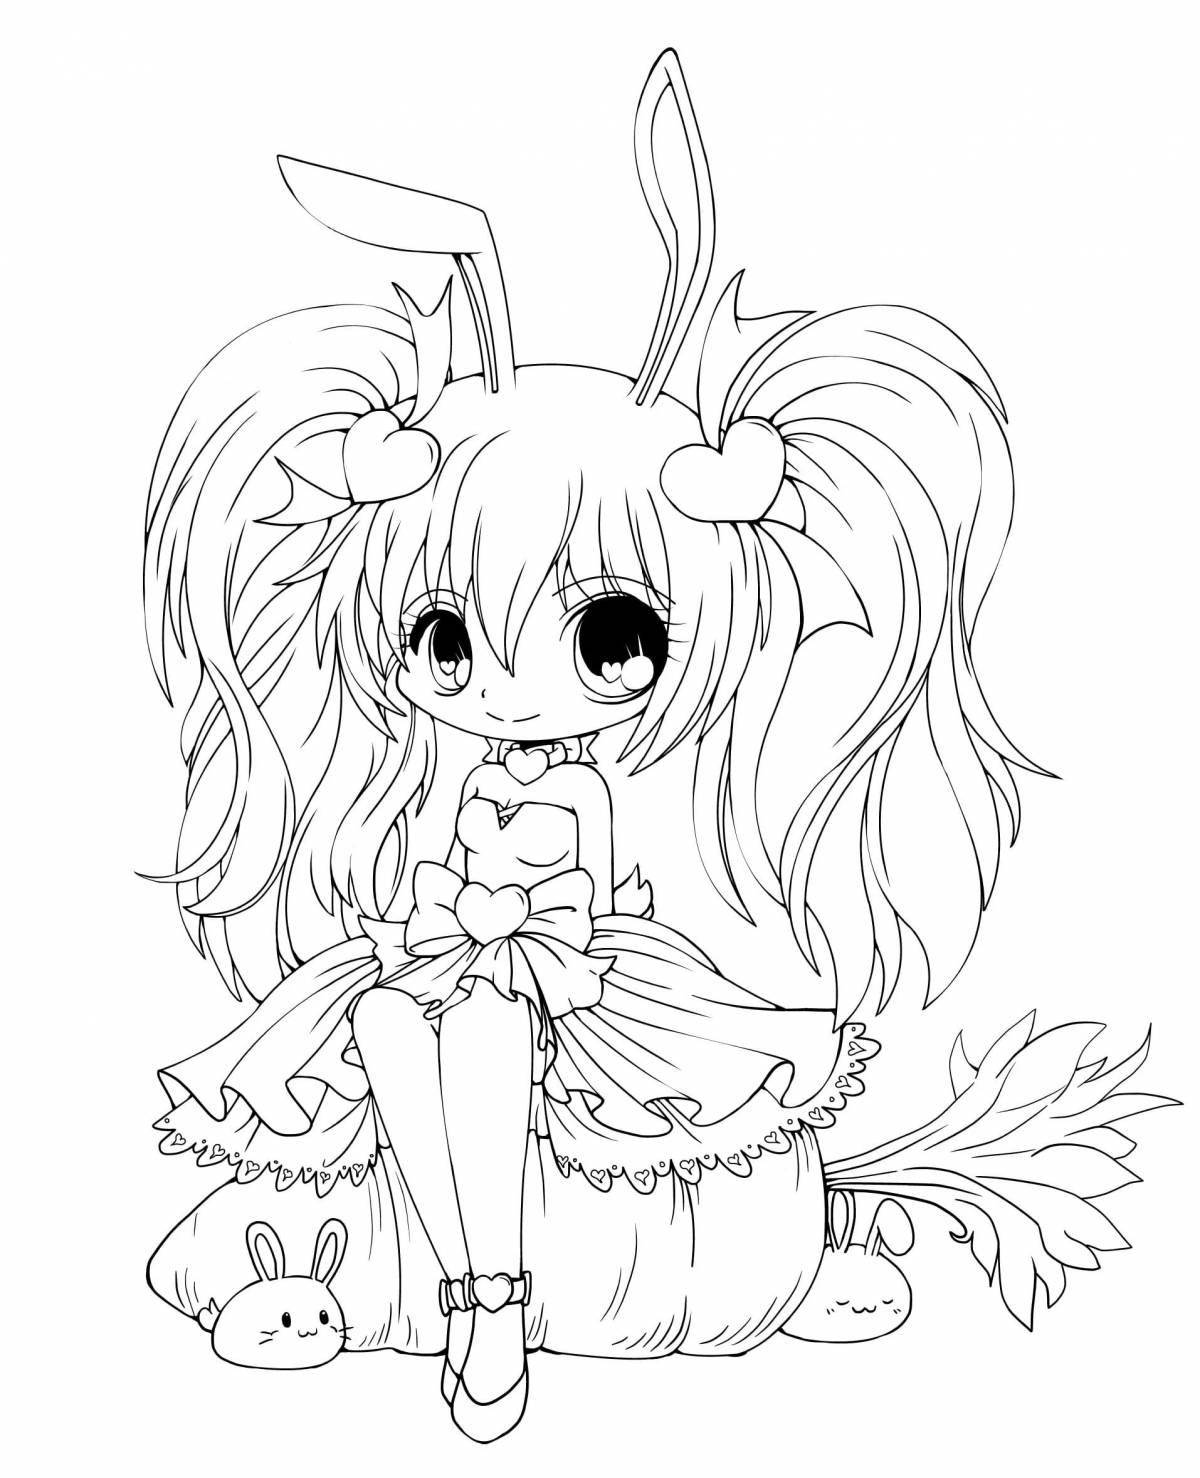 Radiant coloring page bunny girl